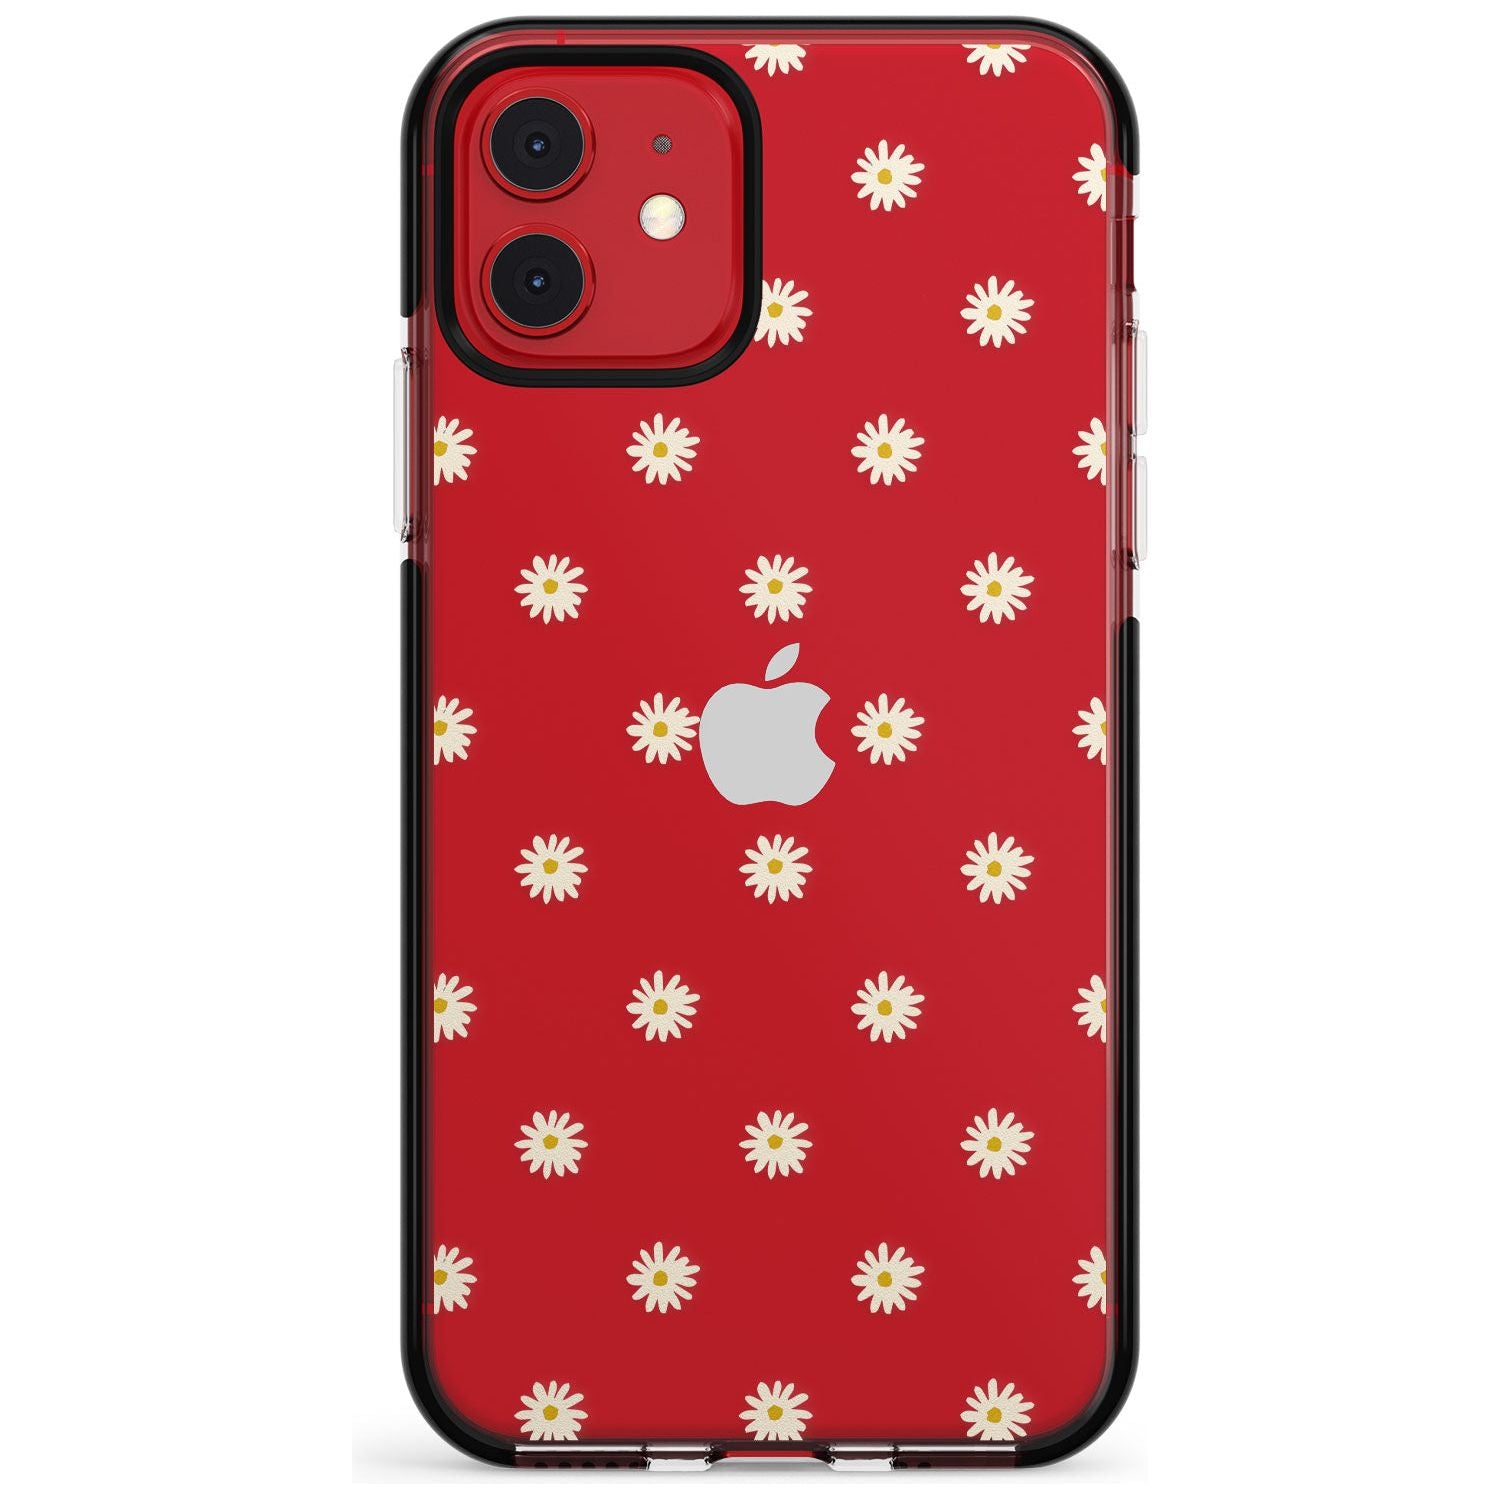 Daisy Pattern - Clear  Cute Floral Design Pink Fade Impact Phone Case for iPhone 11 Pro Max